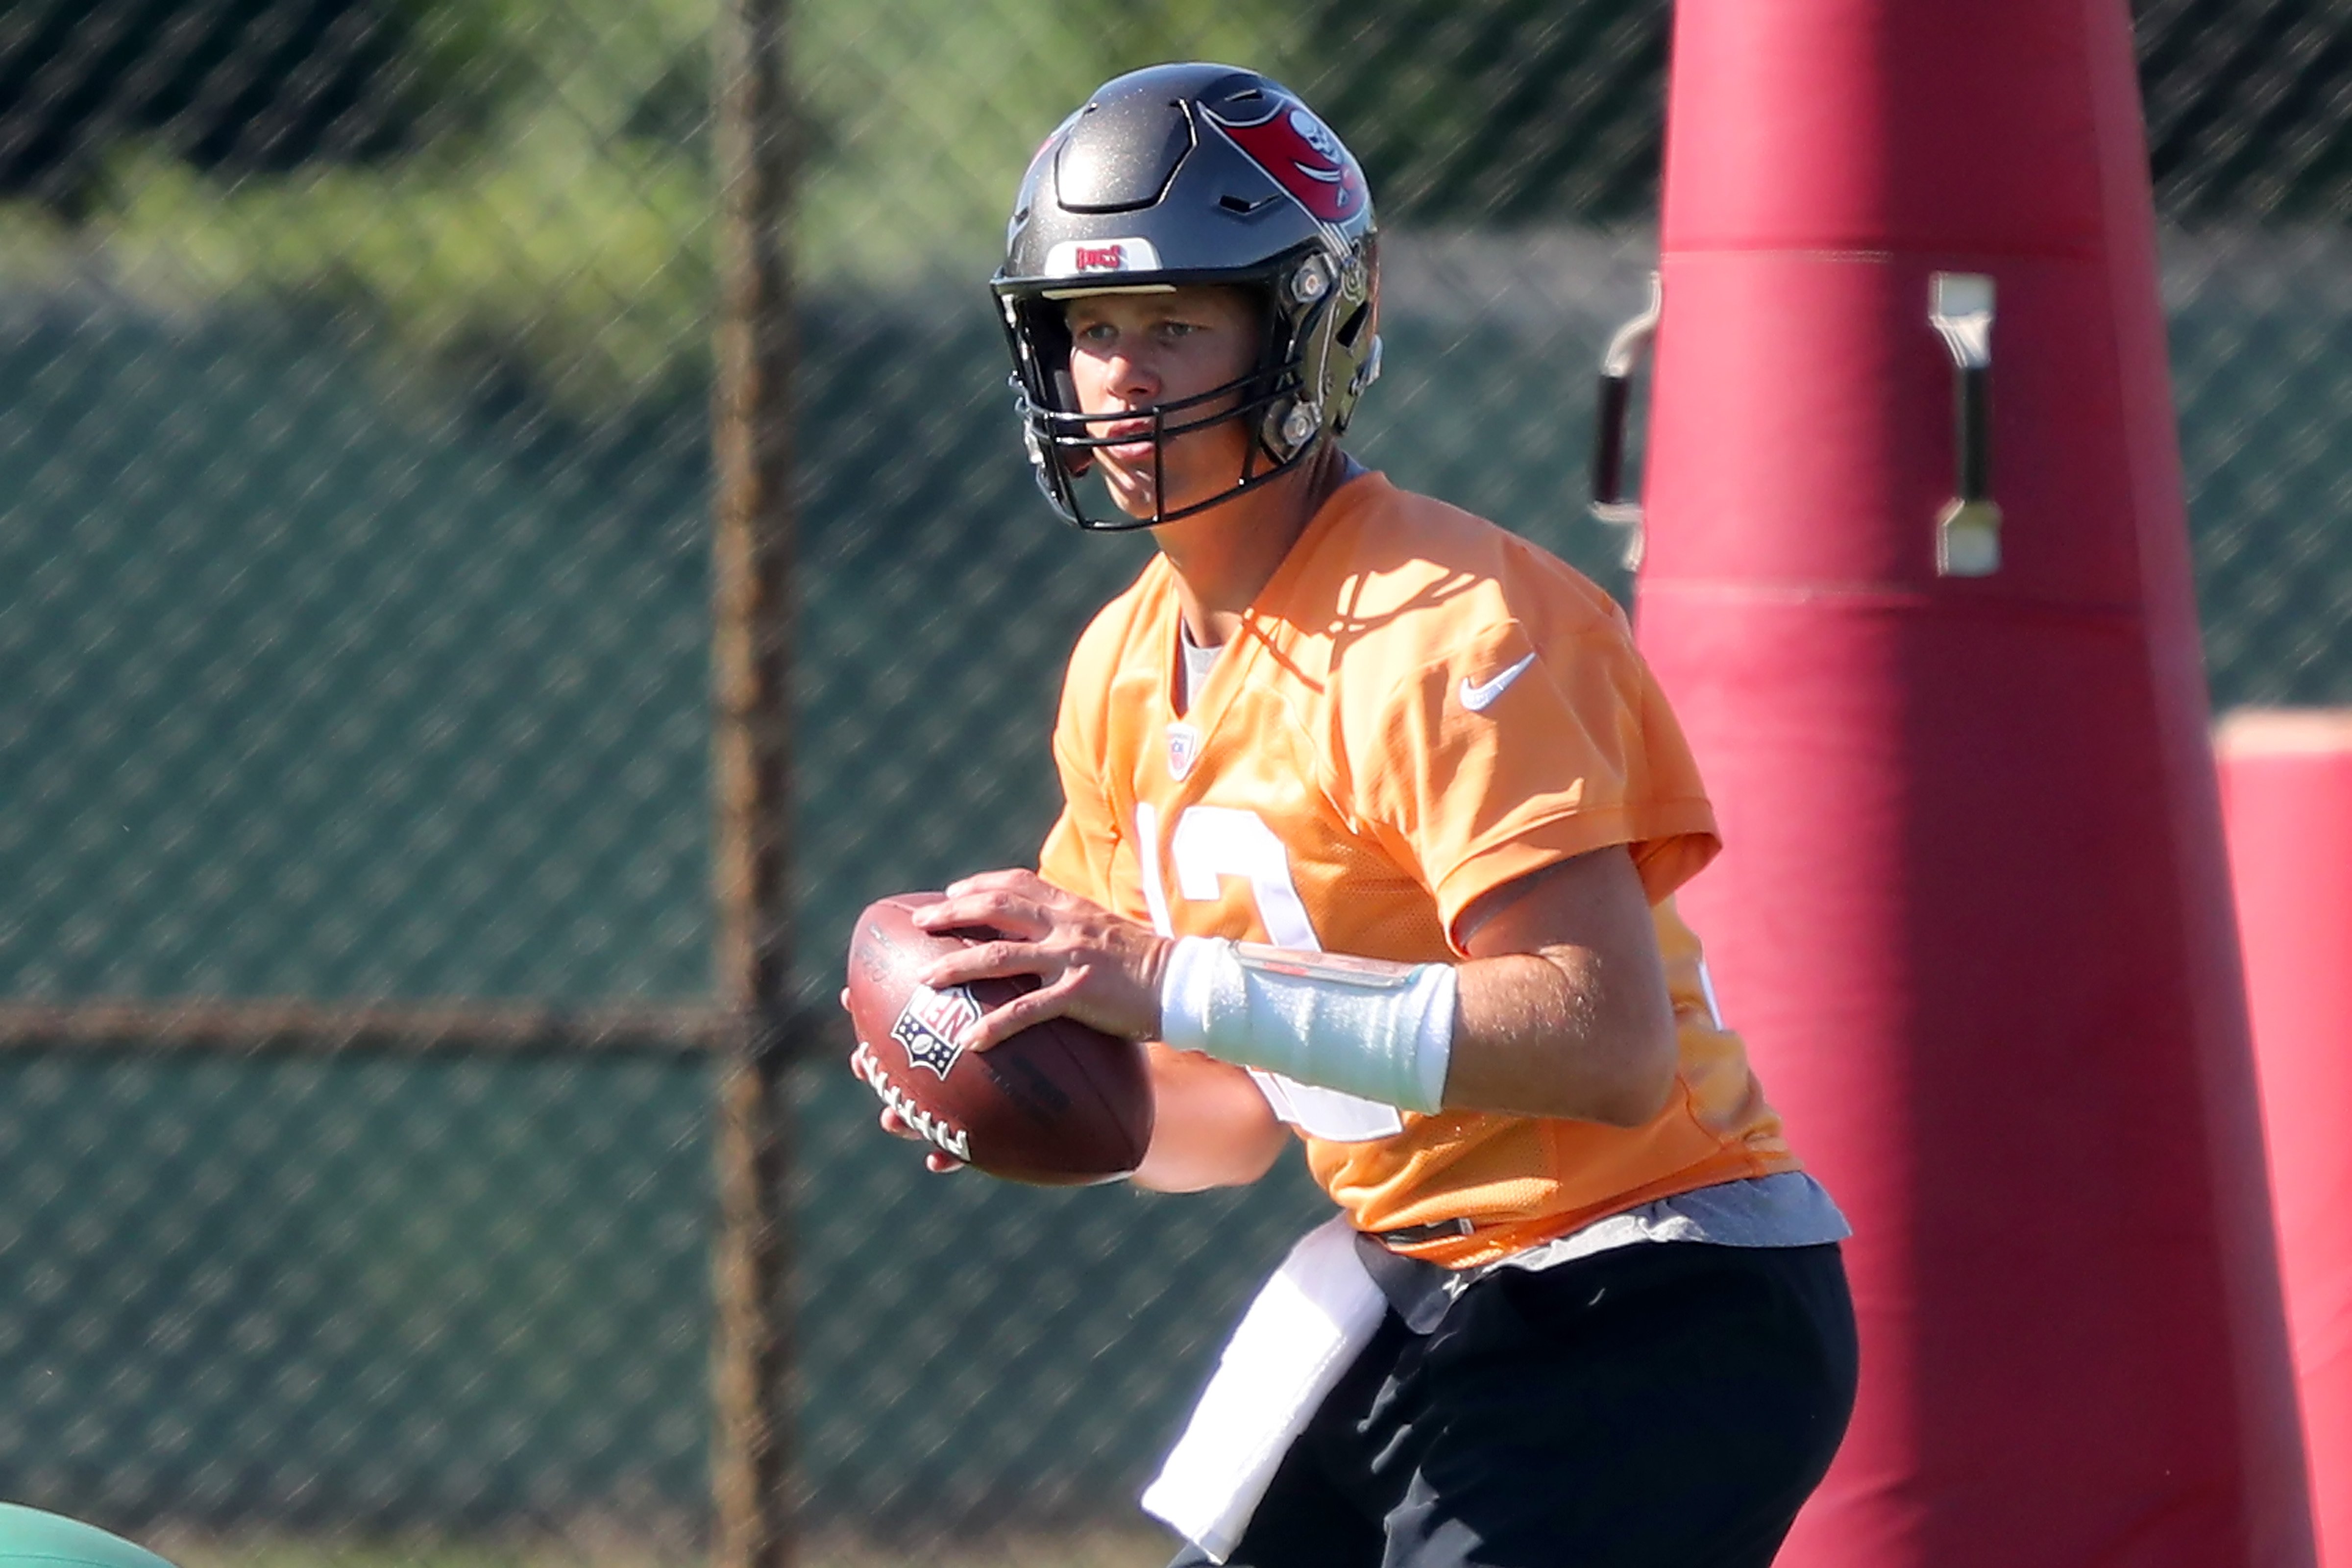 Tom Brady goes through a drill during the Tampa Bay Buccaneers Minicamp on June 07, 2022, at the AdventHealth Training Center at One Buccaneer Place in Tampa, Florida. | Source: Getty Images